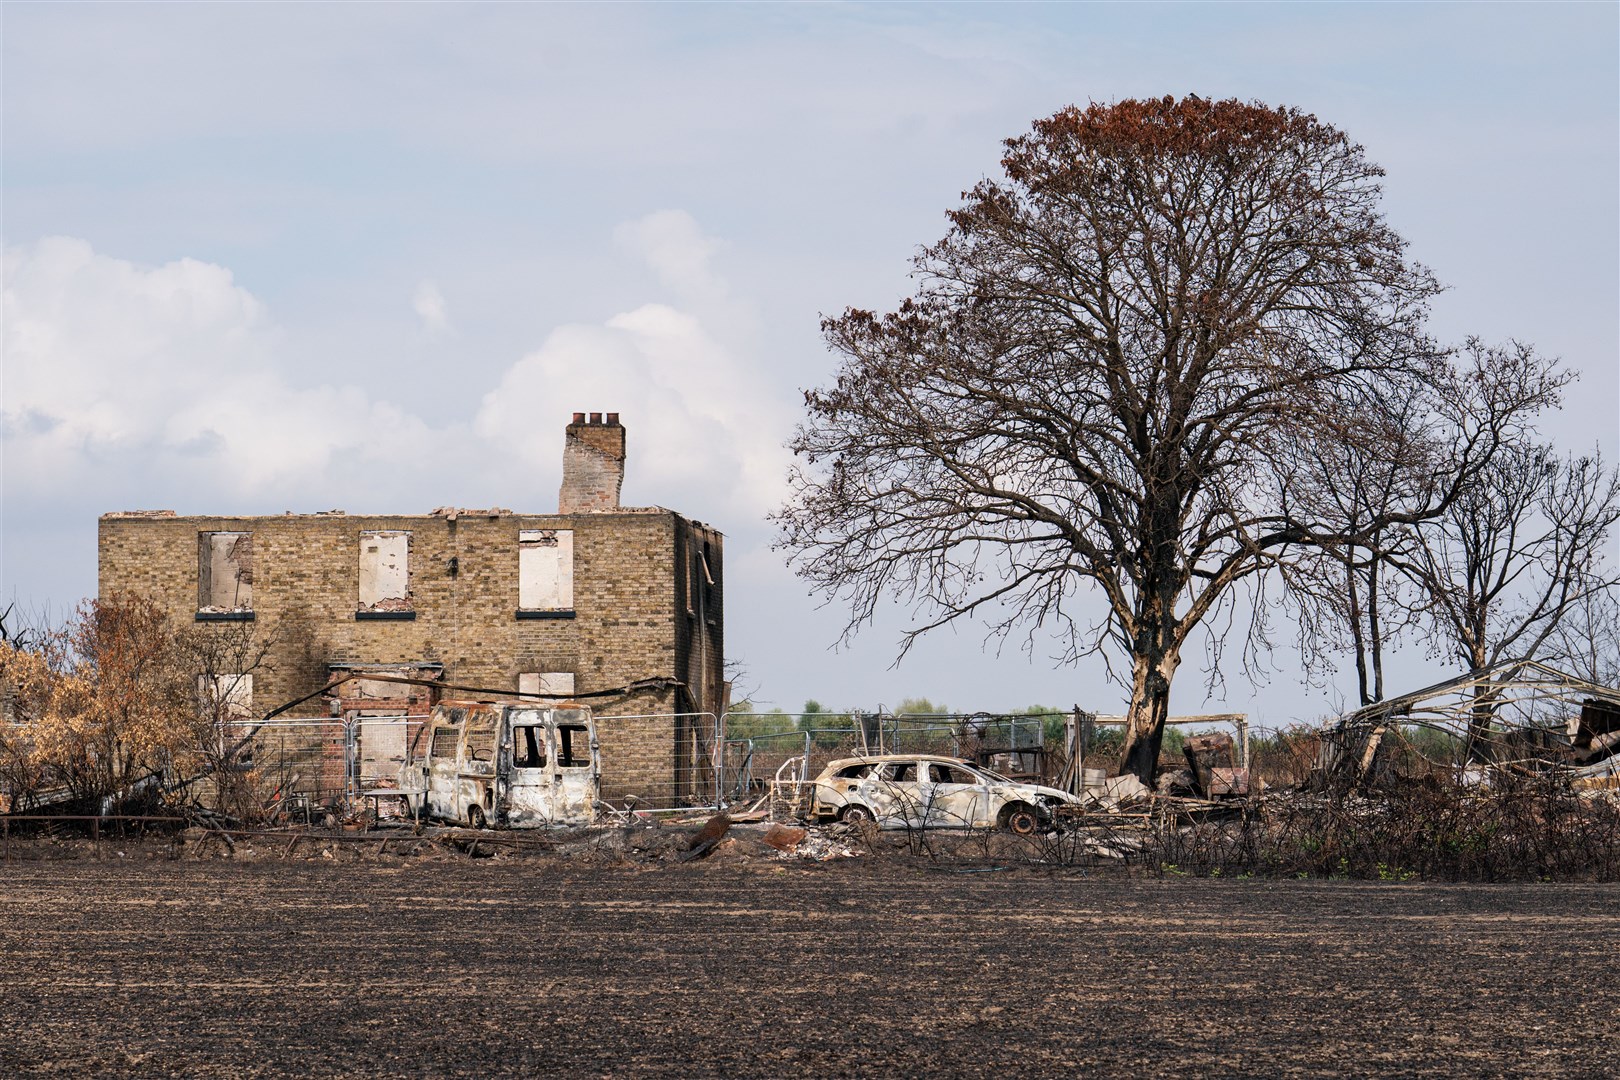 A fire-damaged house in the village of Wennington after the summer heatwave (Dominic Lipinski/PA)